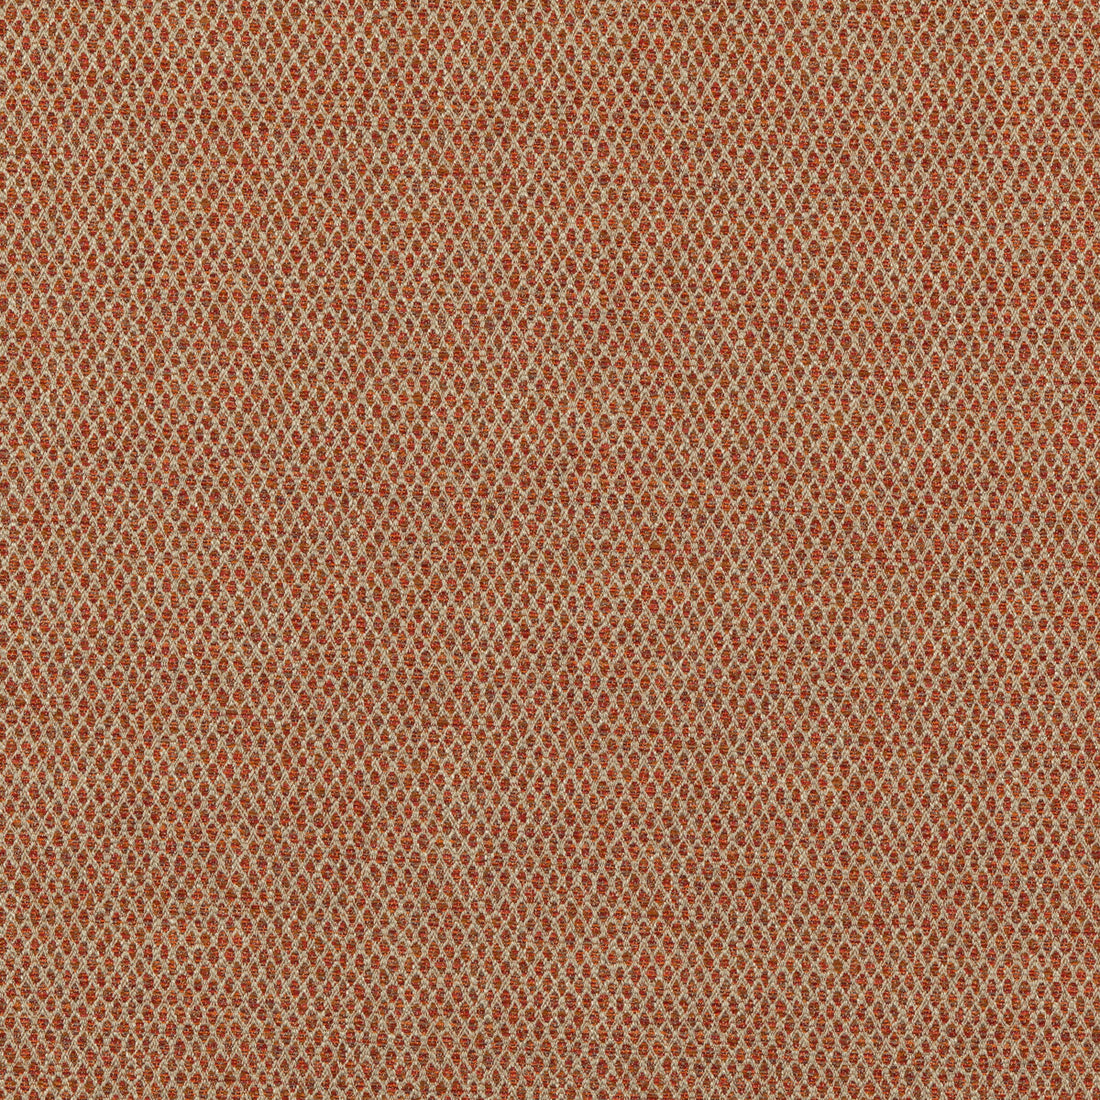 Pednor fabric in spice color - pattern BF10874.330.0 - by G P &amp; J Baker in the Essential Colours II collection